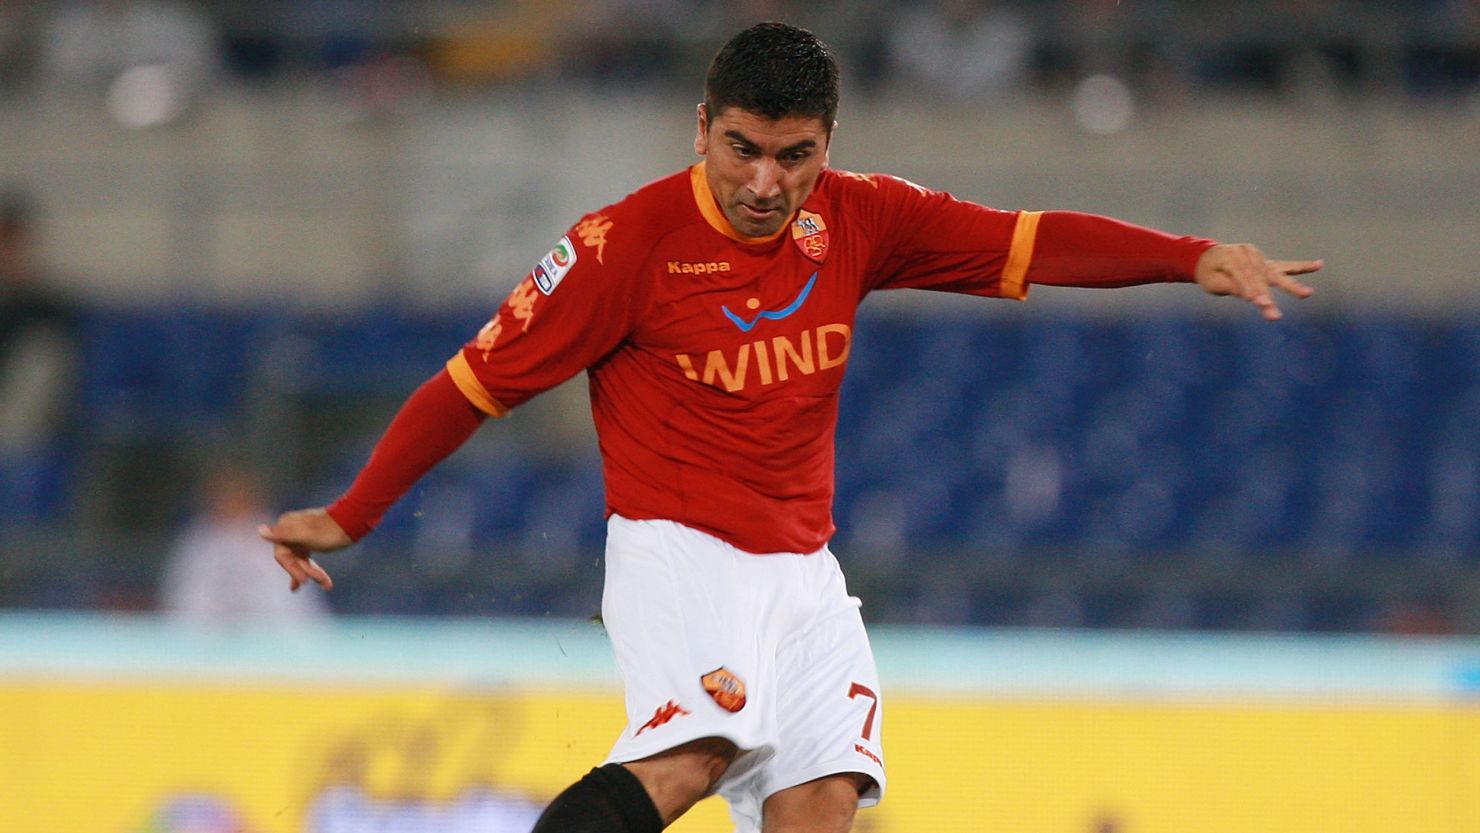 The only January signing by EPL big-spenders Manchester was a loan deal for AS Roma's midfielder David Pizarro.